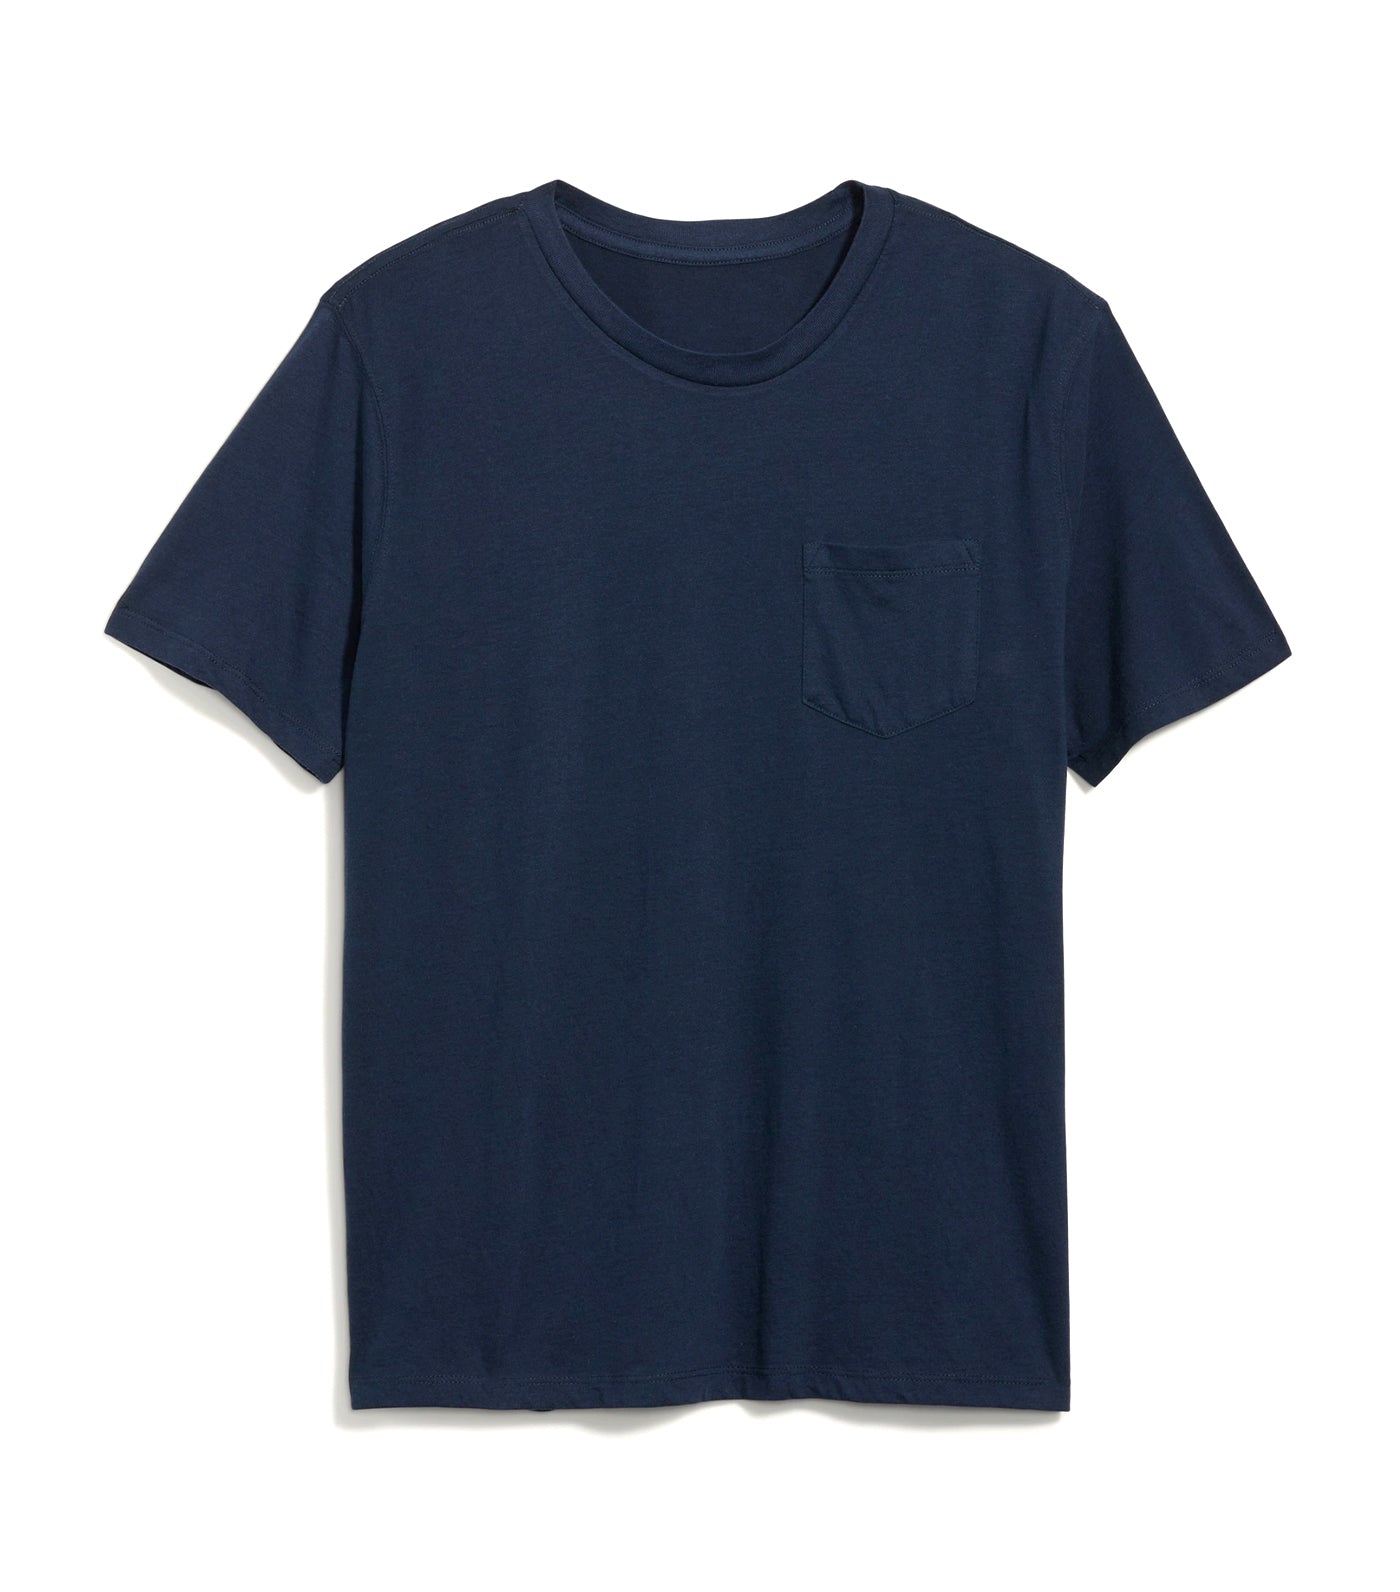 Soft-Washed Chest-Pocket Crew-Neck T-Shirt for Men In The Navy